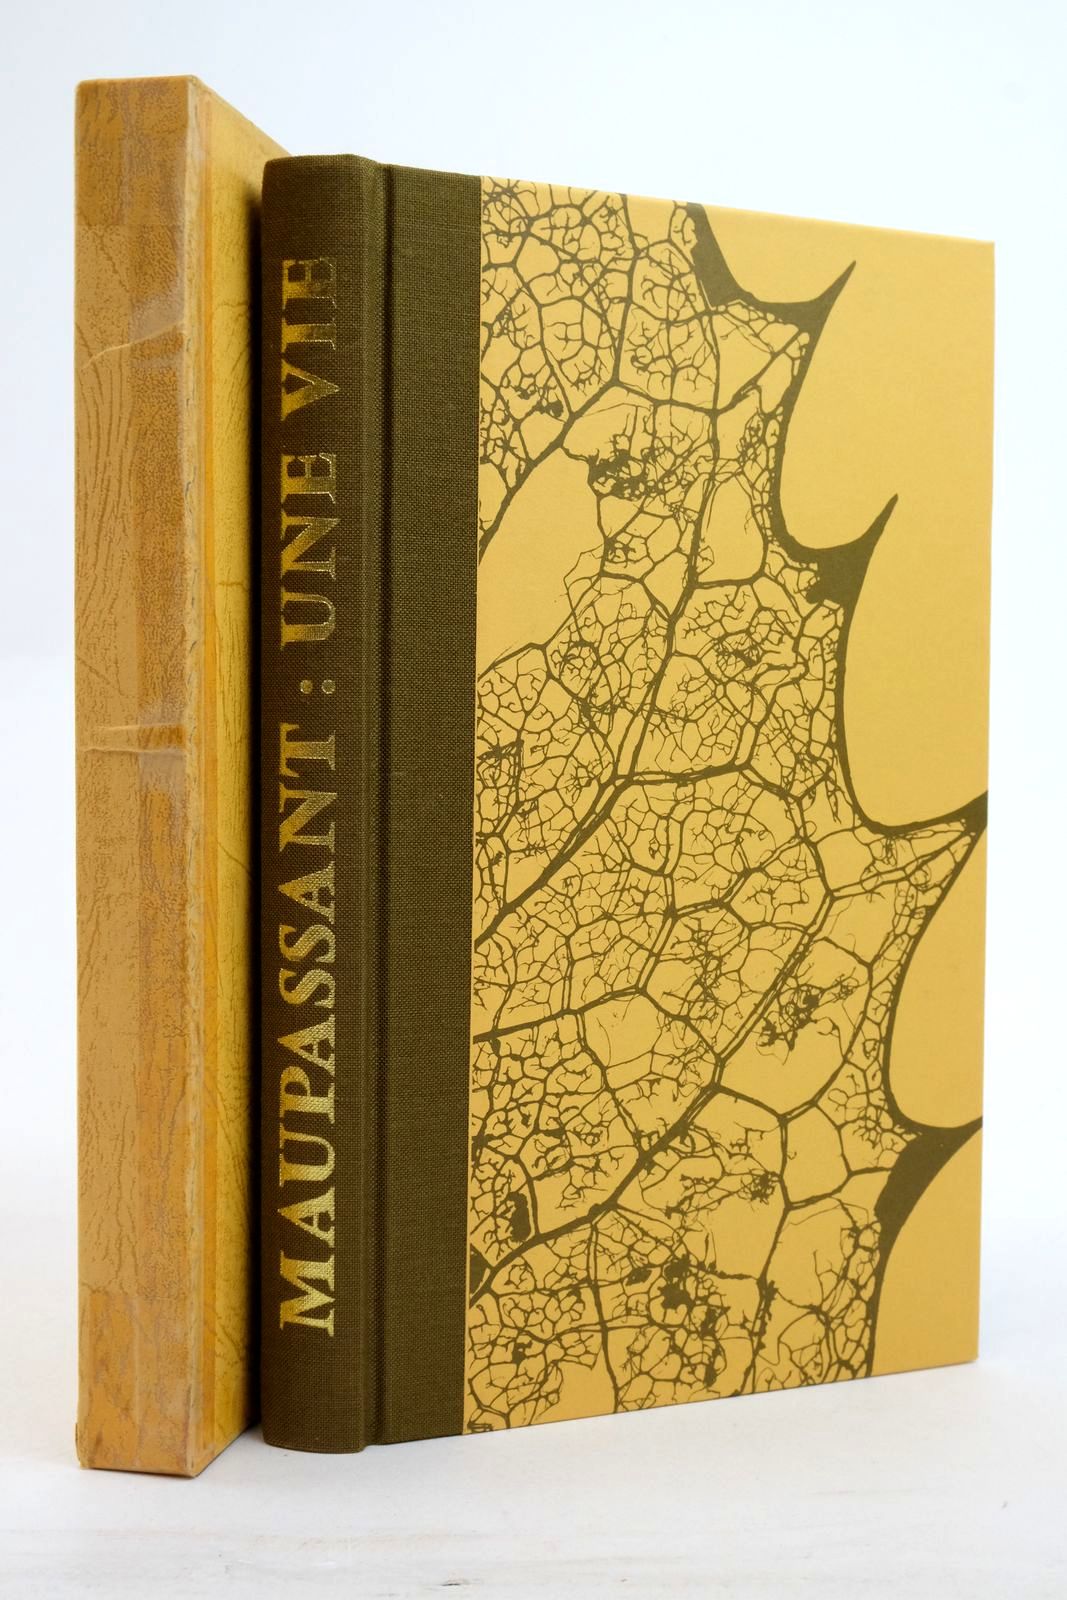 Photo of UNE VIE written by De Maupassant, Guy illustrated by Acs, Laszlo published by Folio Society (STOCK CODE: 2138227)  for sale by Stella & Rose's Books